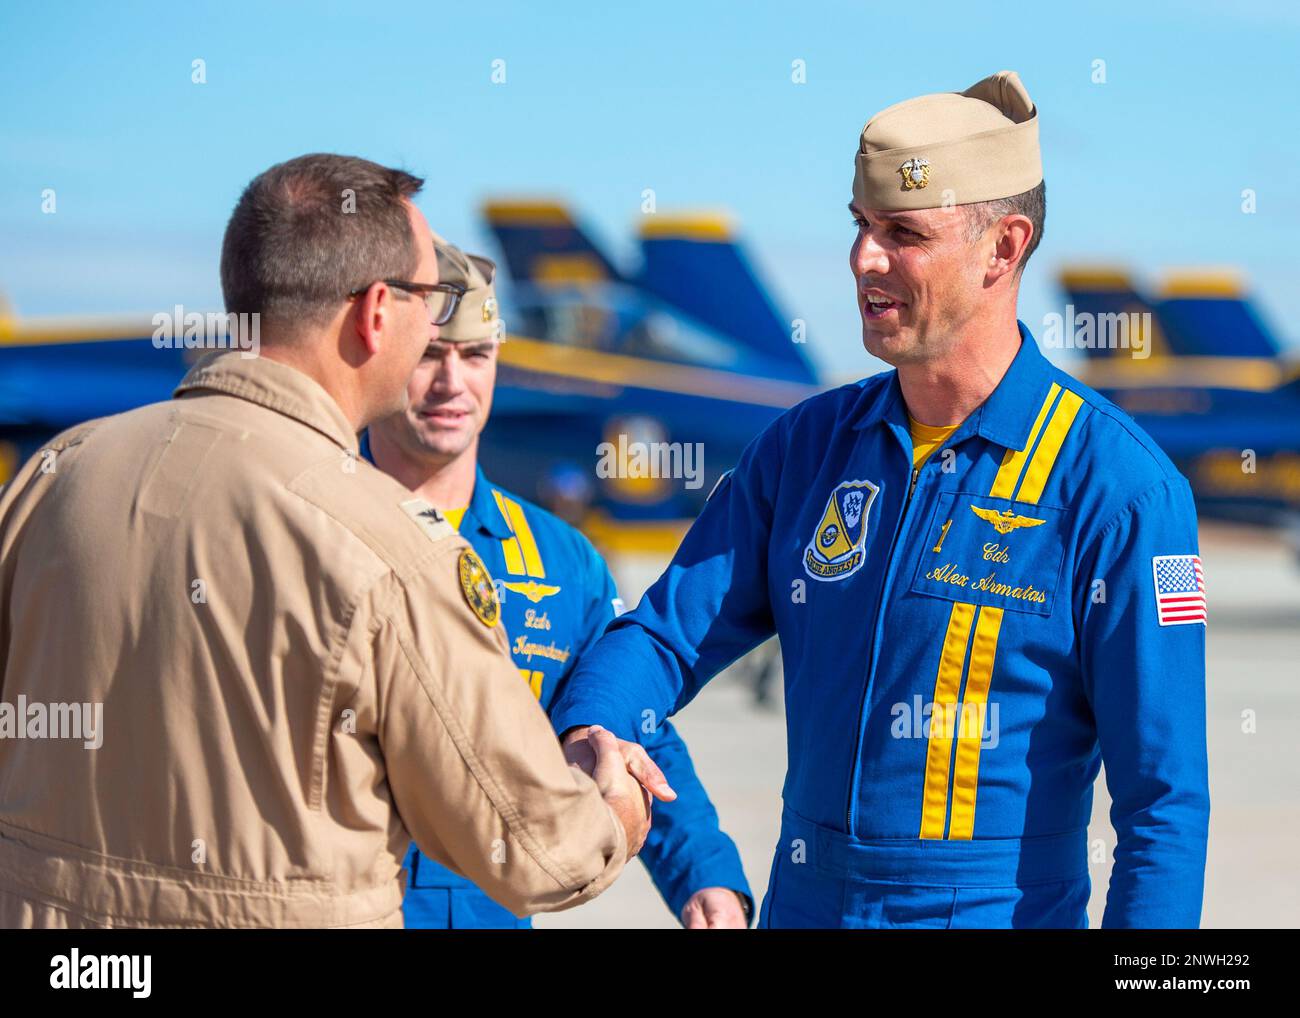 Cmdr. Alex Armatas, commanding officer and flight leader of the U.S. Navy Flight Demonstration Squadron, the Blue Angels, right, meets base leadership upon arrival to Naval Air Facility (NAF) El Centro. The Blue Angels are currently conducting winter training at NAF El Centro, California, in preparation for the upcoming 2023 air show season. Stock Photo